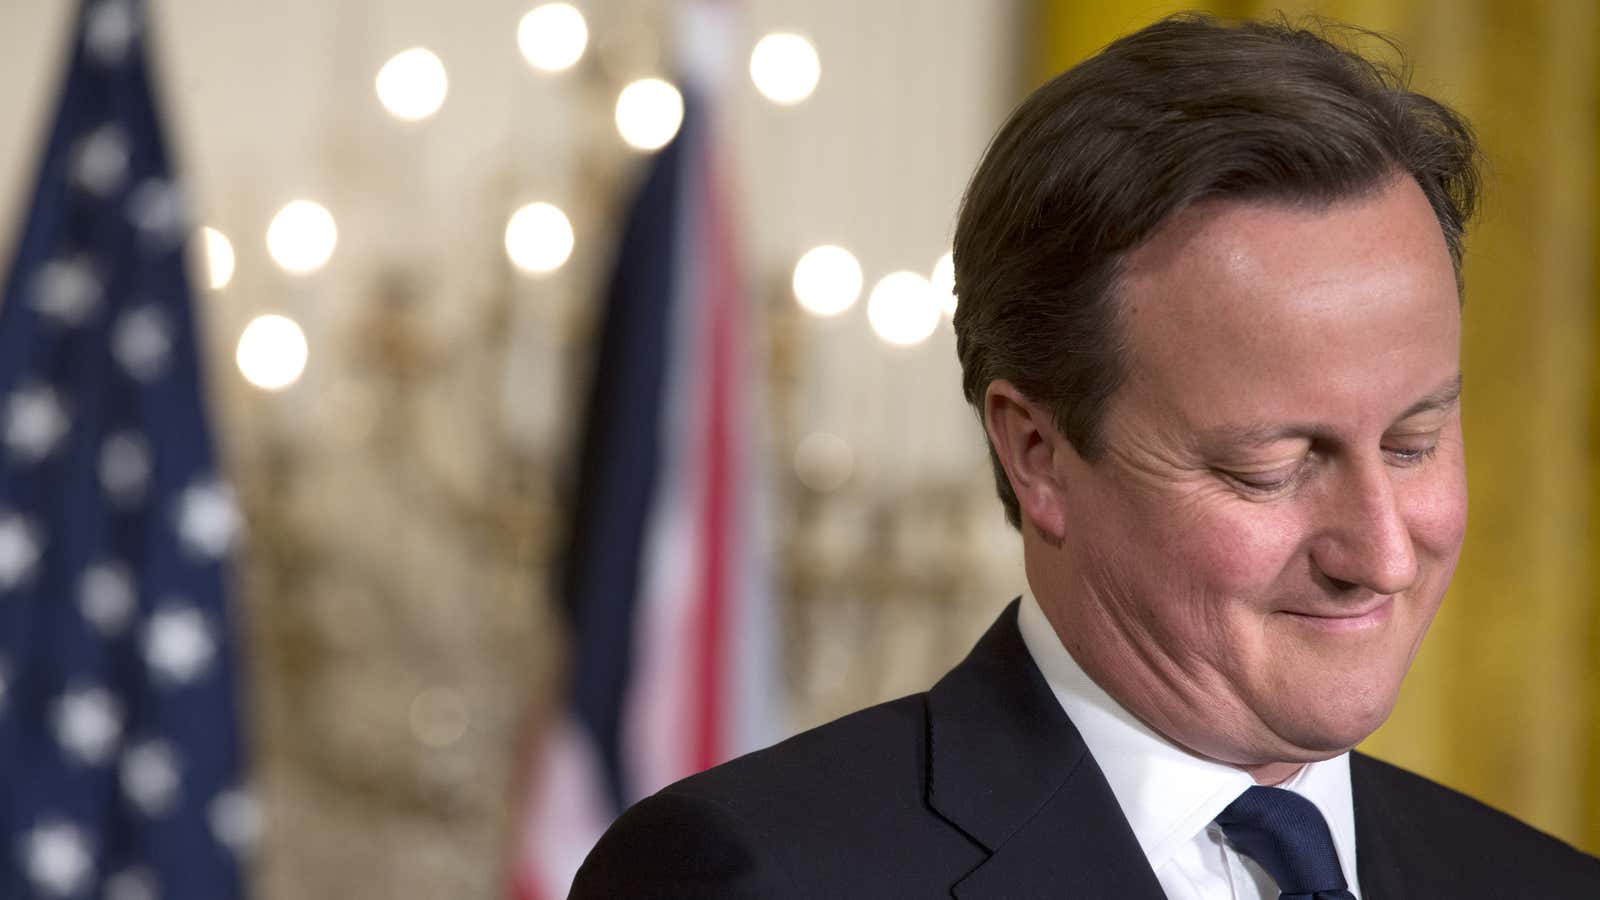 UK prime minister David Cameron’s austerity policies  have had a tough run lately.